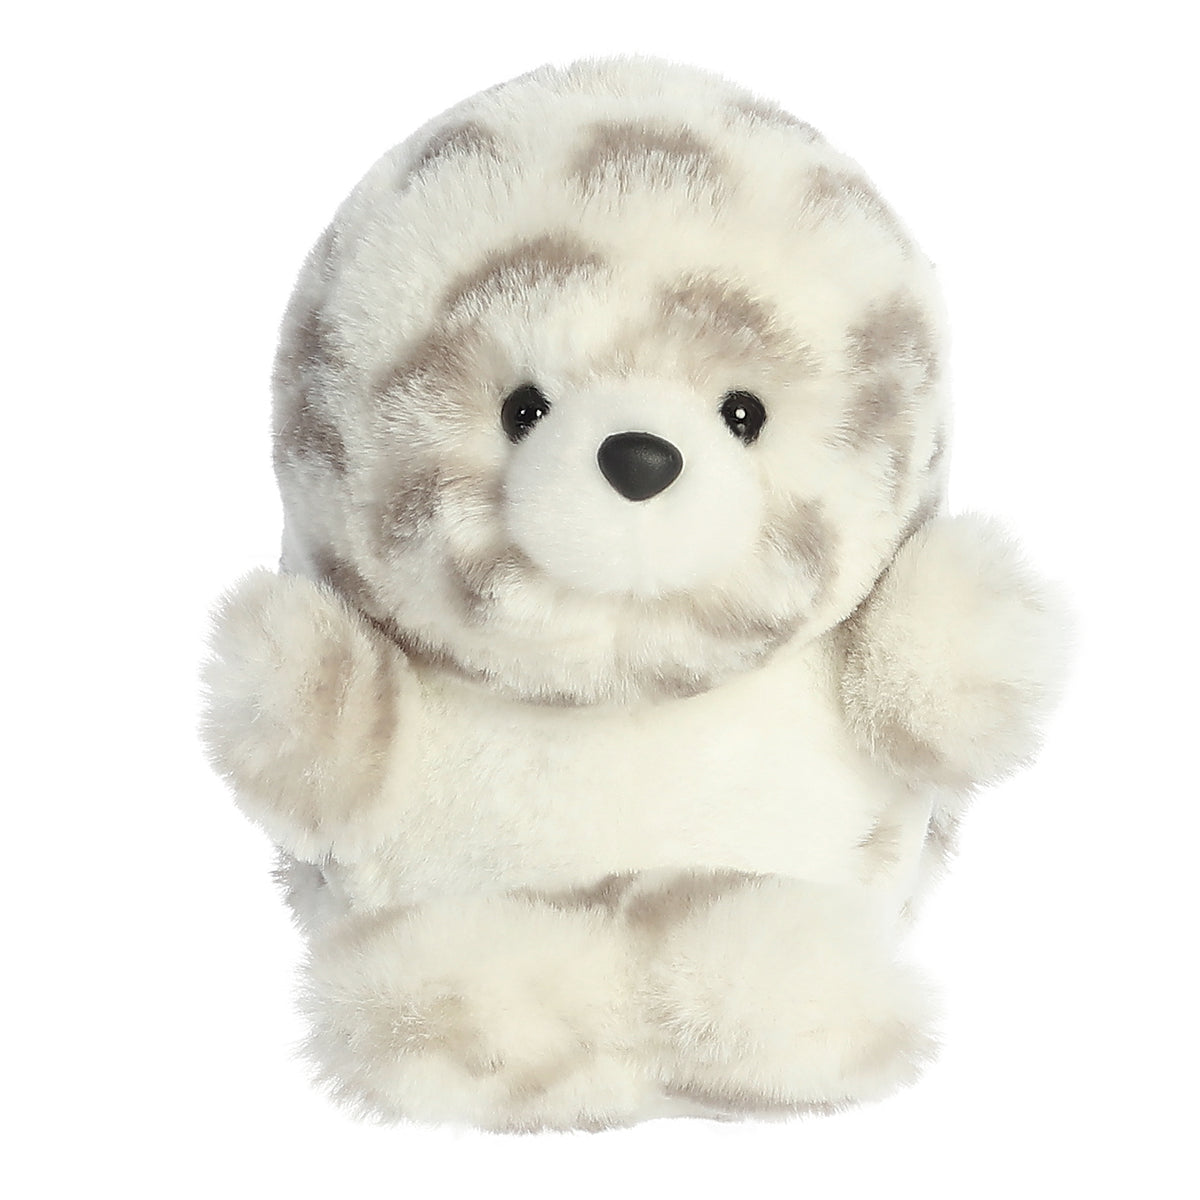 A Seal plush with white and gray spots, balancing adorably, ready for cuddles with an extra-fluffy head and charming pose.